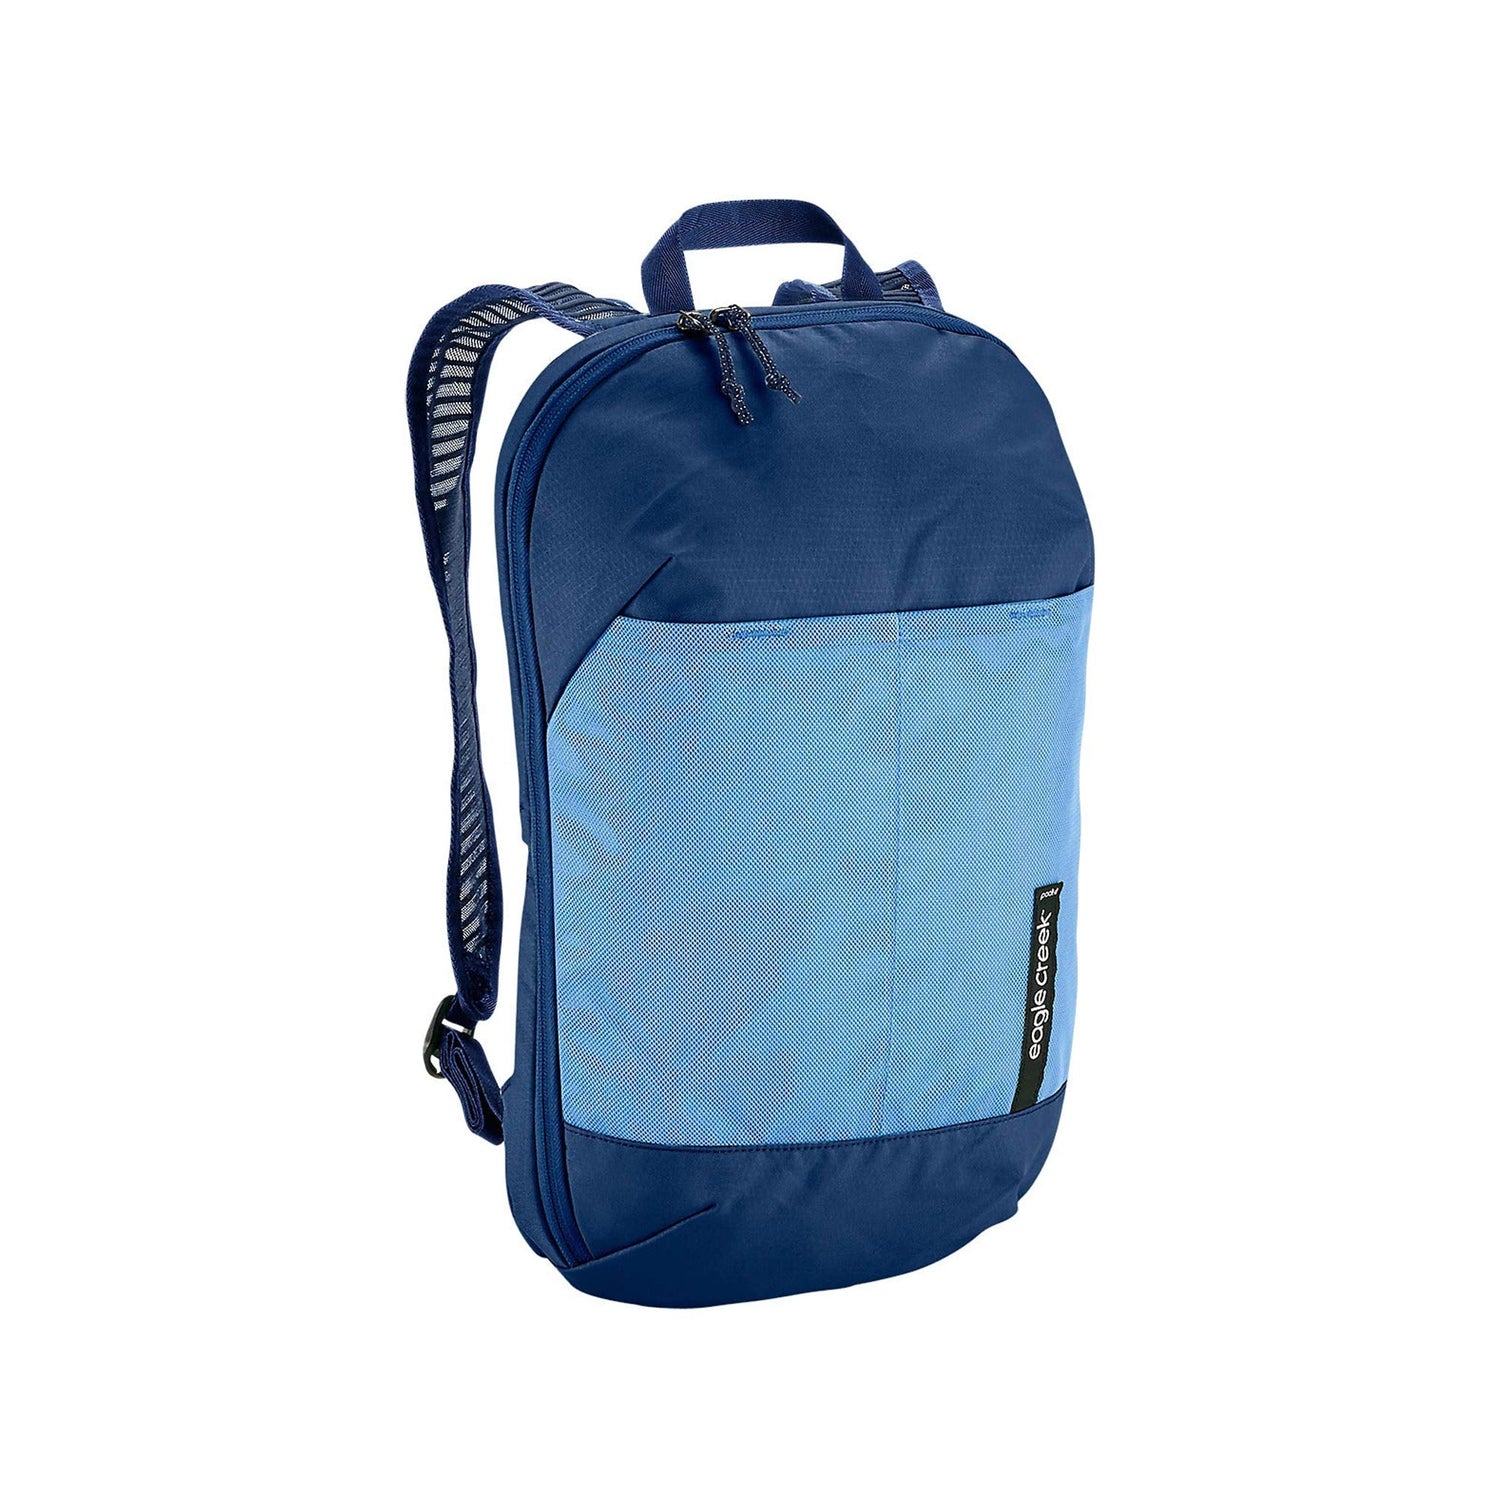 PACK-IT™ Reveal Org Convertible Pack - AIZOME BLUE/GREY